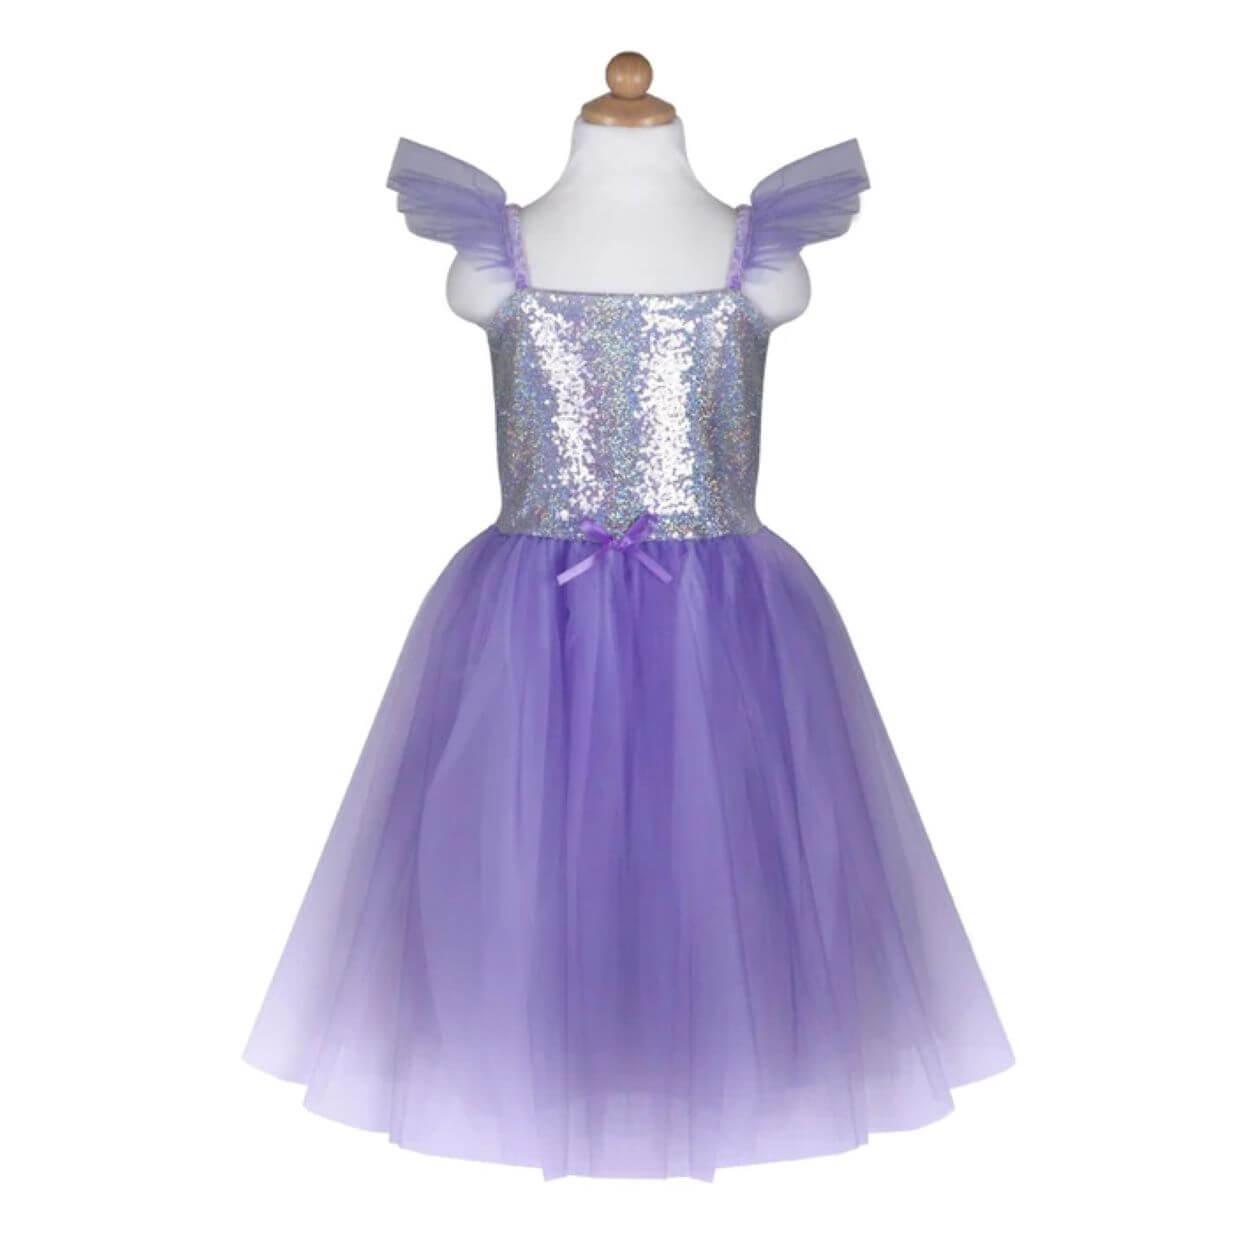 Lilac party dress with sequinned bodice spaghetti straps and tulle short sleeves with a full shimmery and tulle skirt